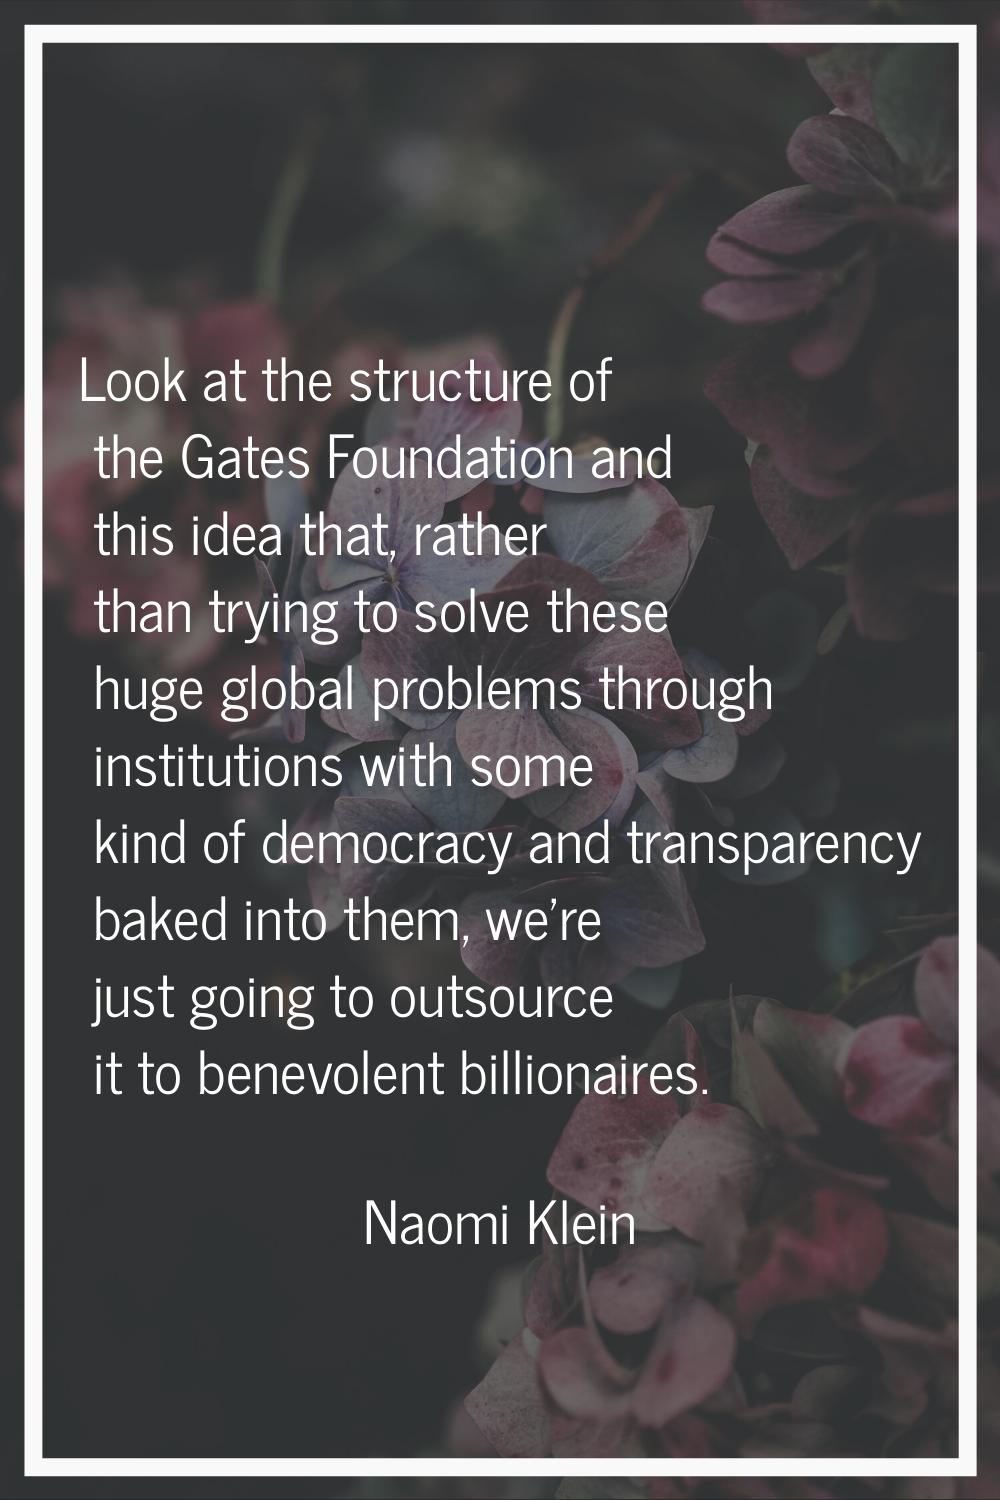 Look at the structure of the Gates Foundation and this idea that, rather than trying to solve these